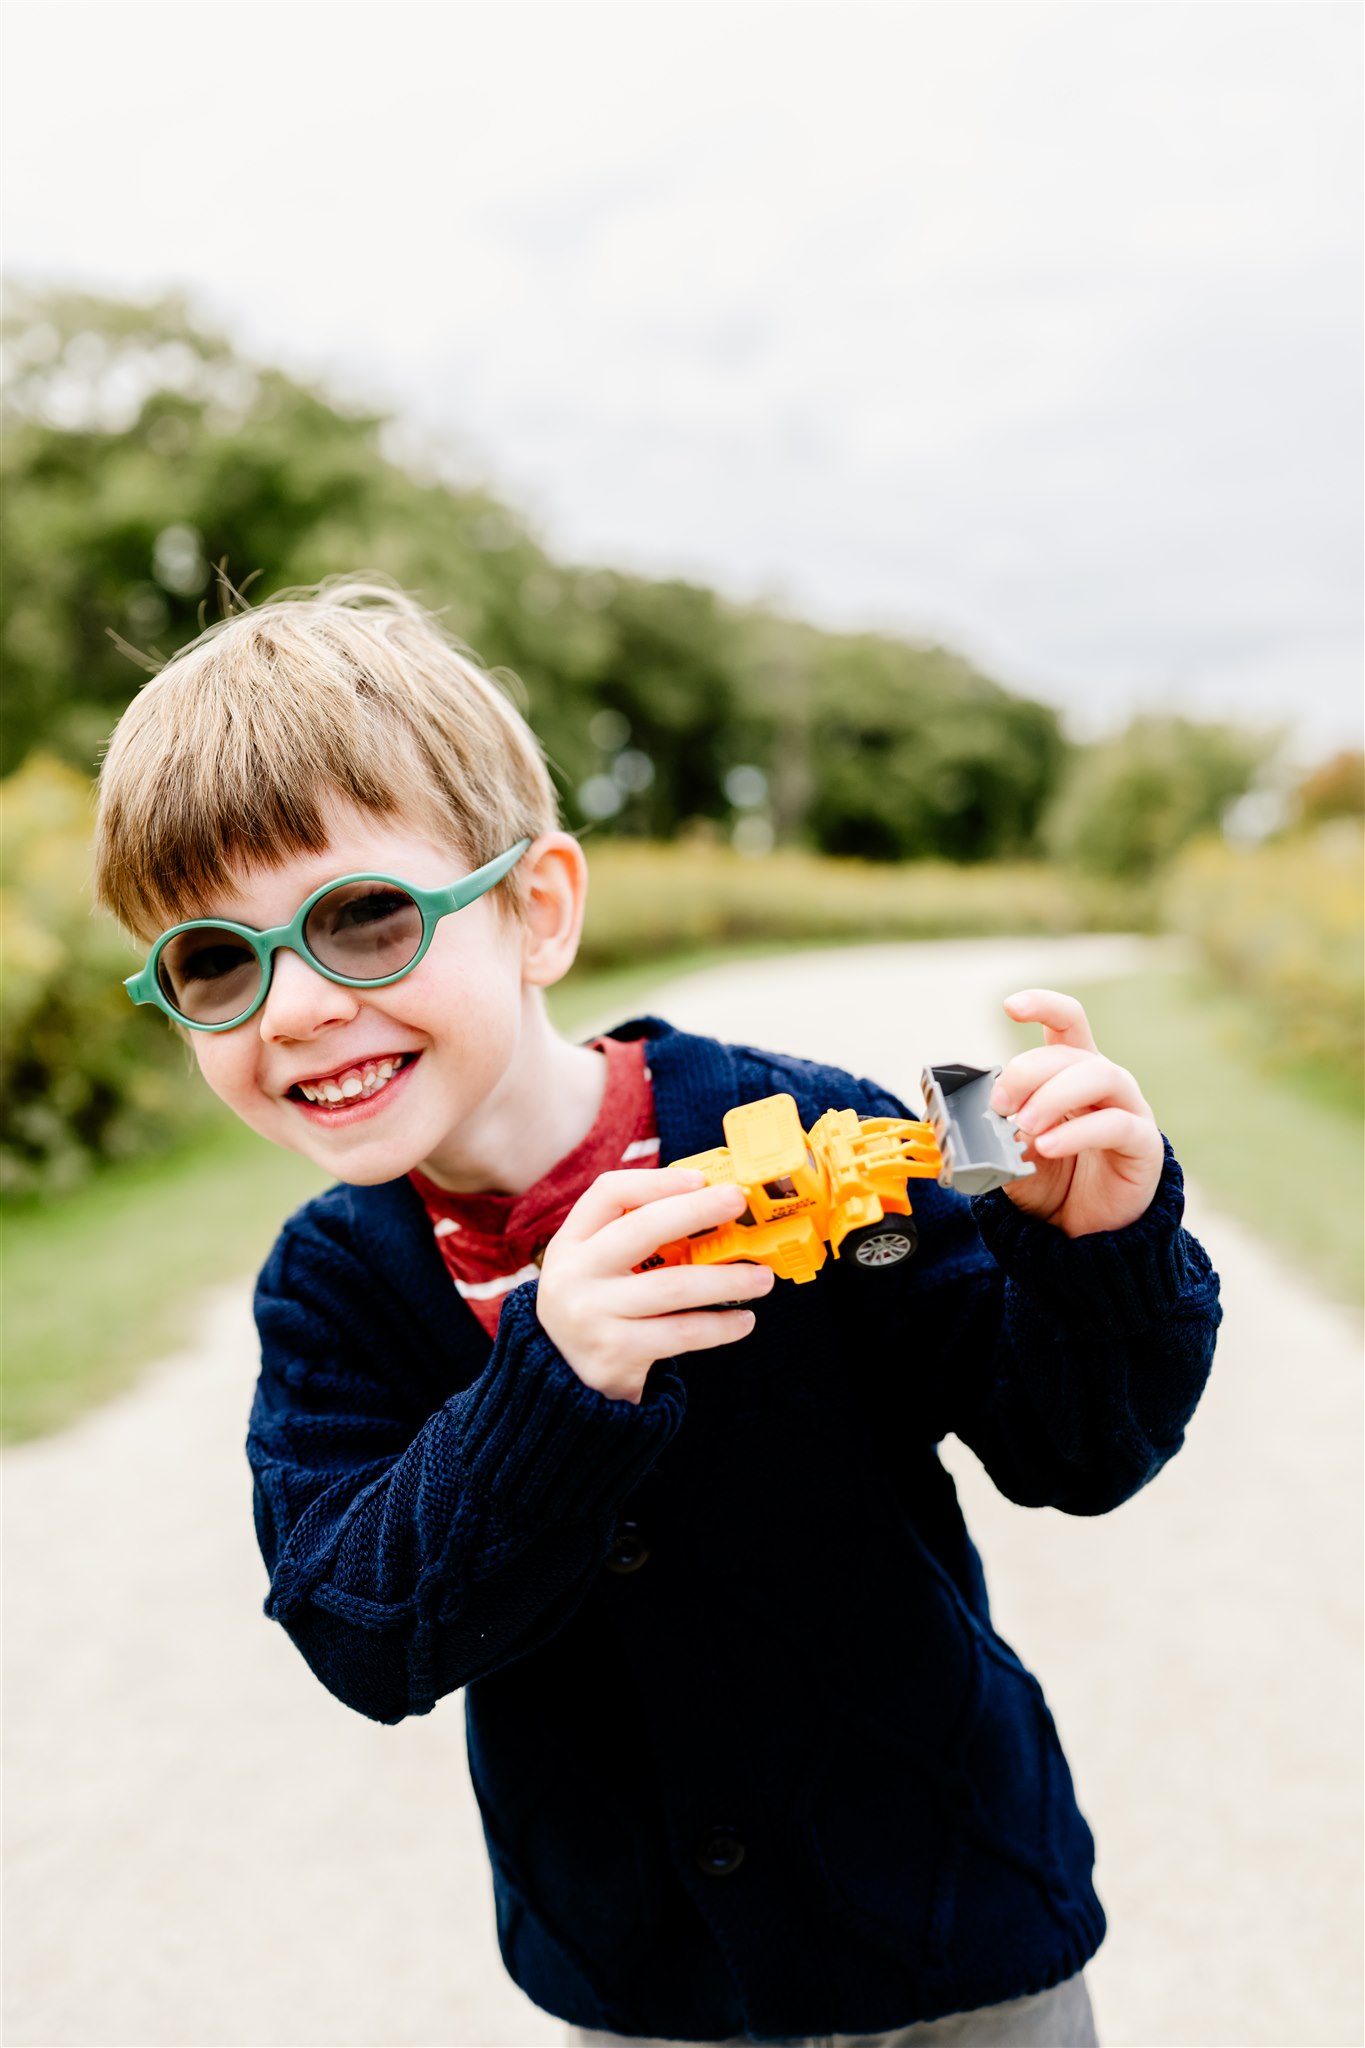 A young boy in a blue sweater and glasses plays with a toy front end loader in a park path thanks to STEM Chicago